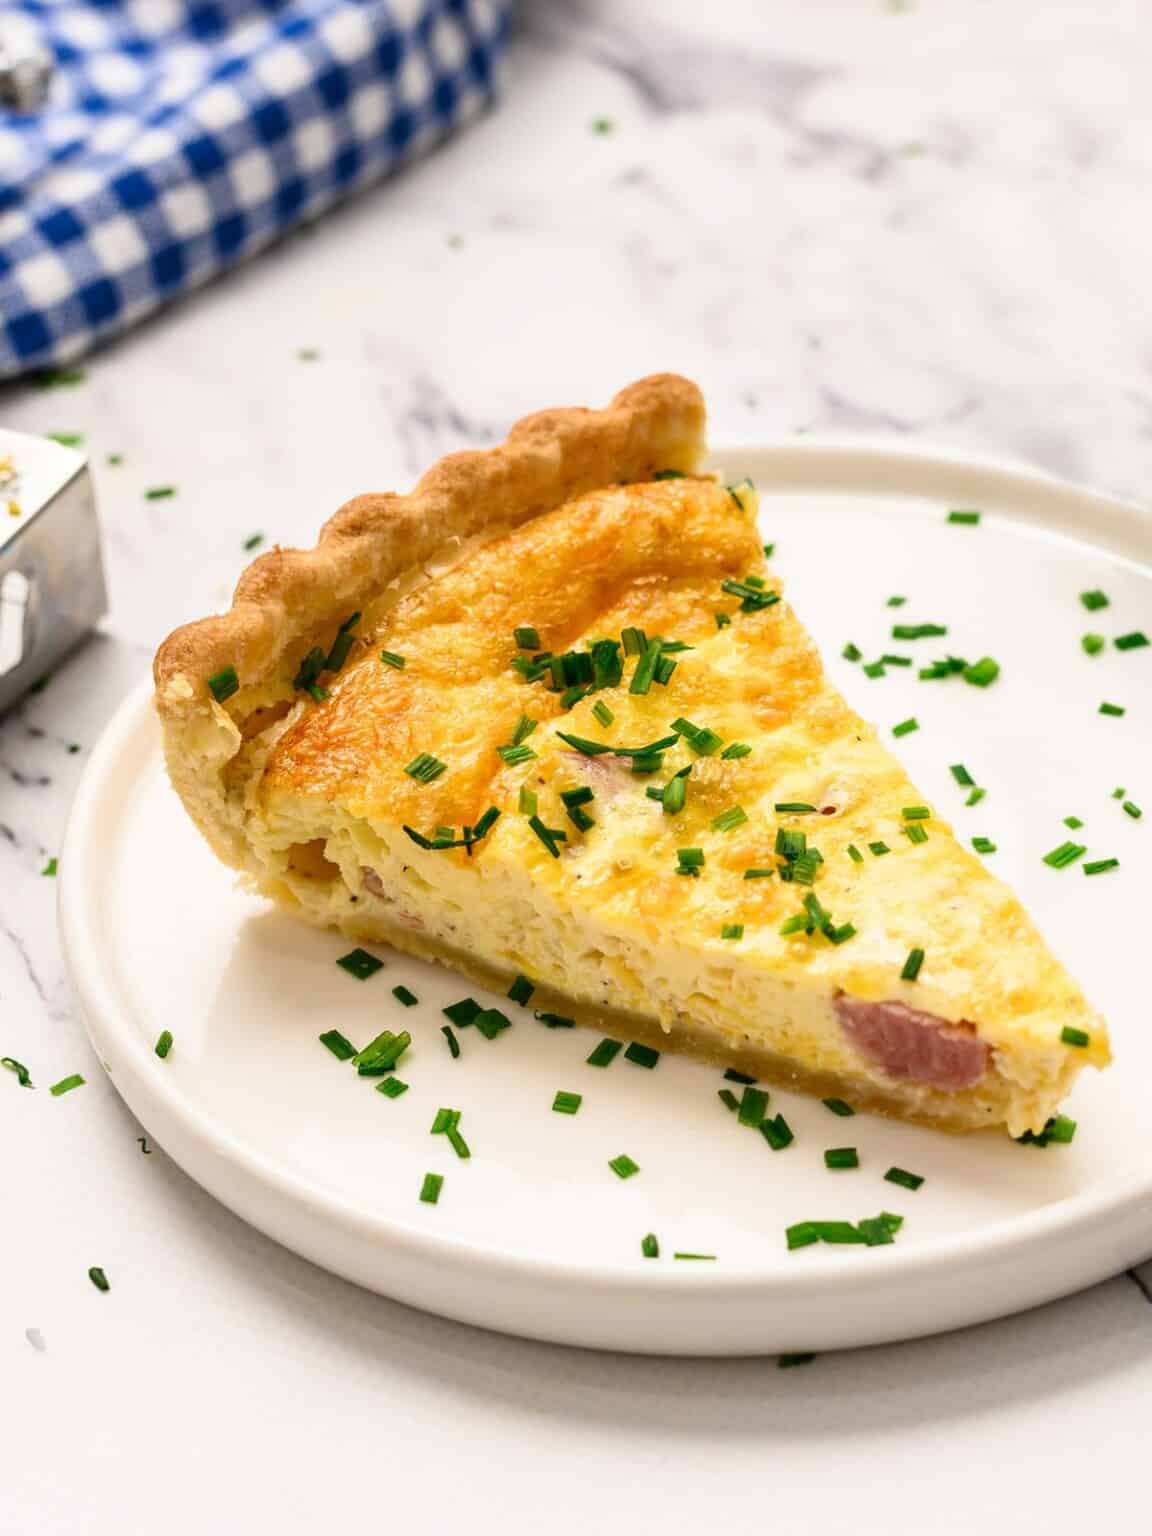 The Best Quiche Recipe - Choose Your Filling